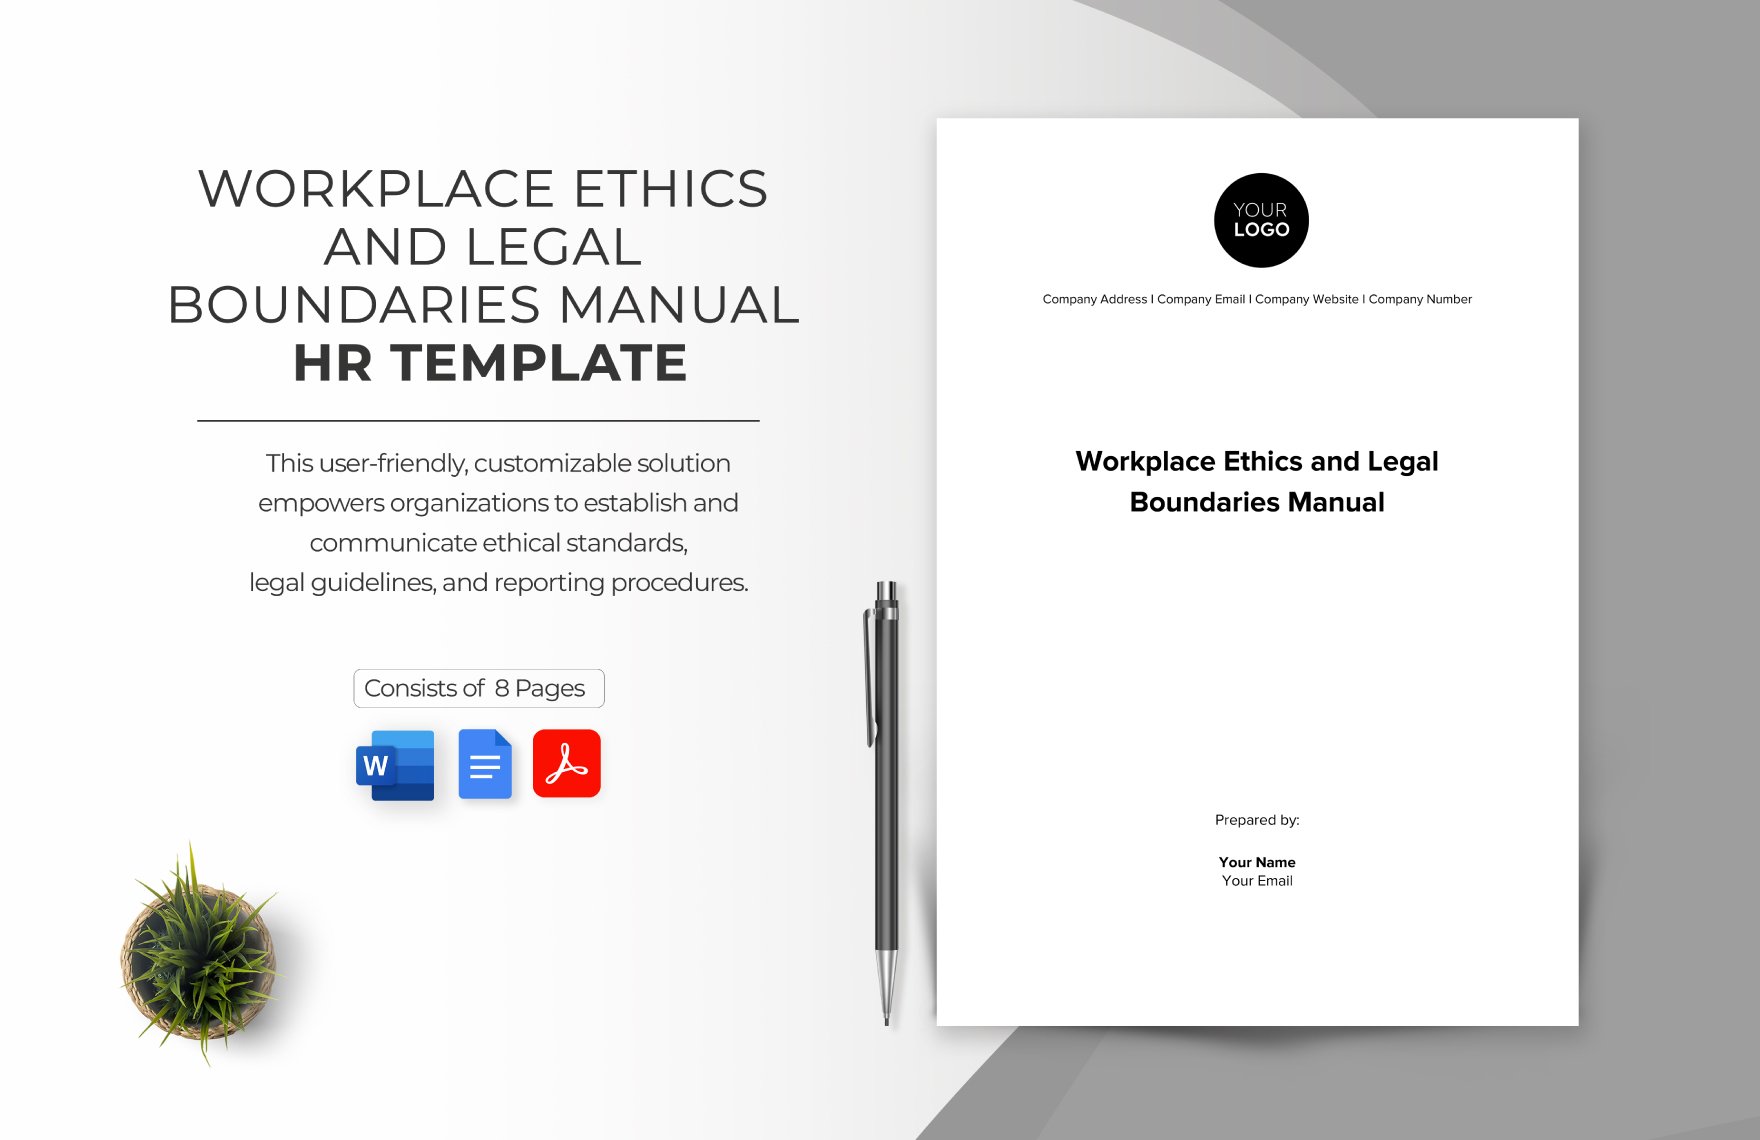 Workplace Ethics and Legal Boundaries Manual HR Template in Word, Google Docs, PDF